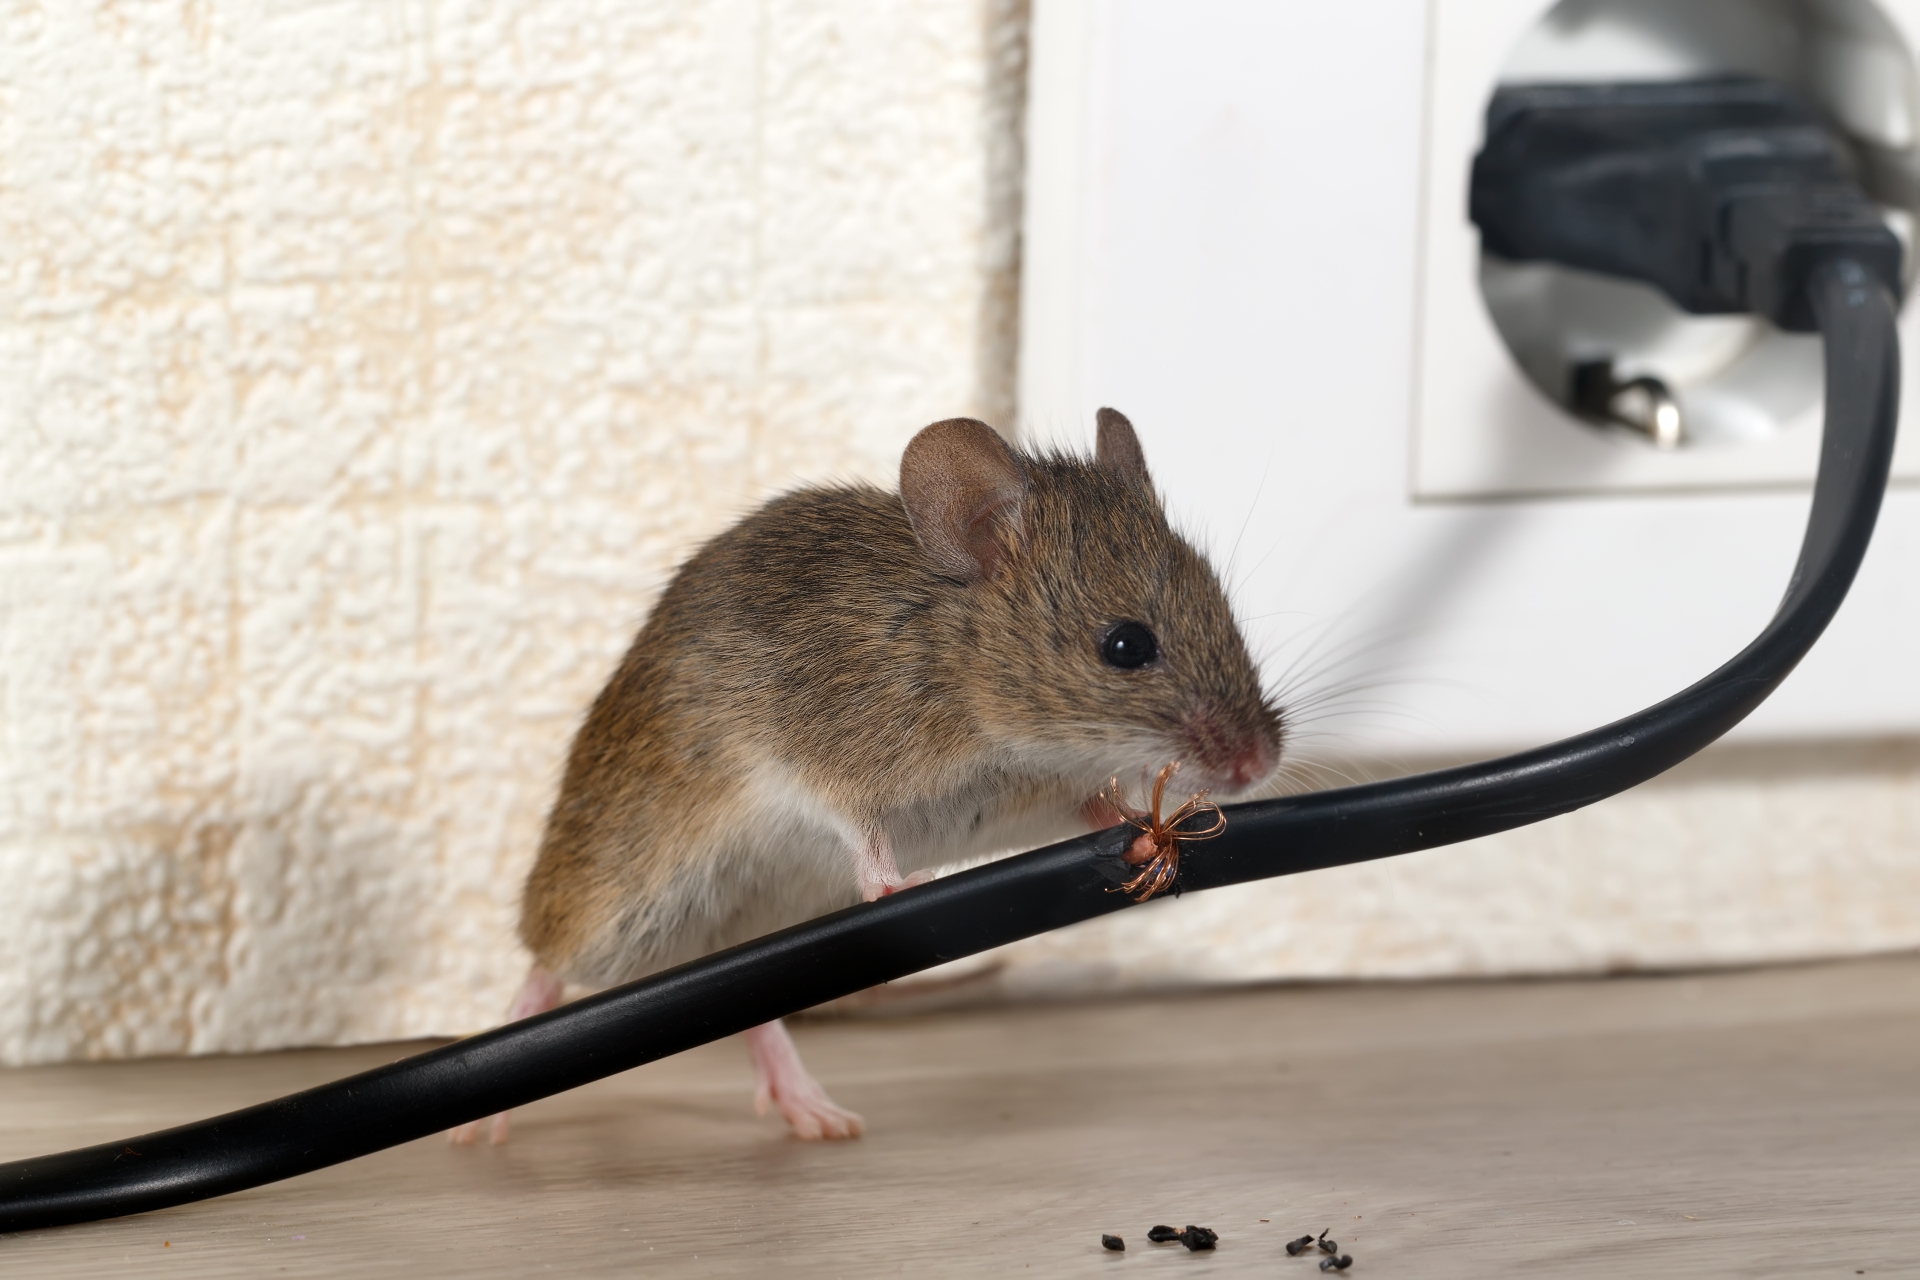 Mice Infestation, Pest Control in Hither Green, SE13. Call Now 020 8166 9746